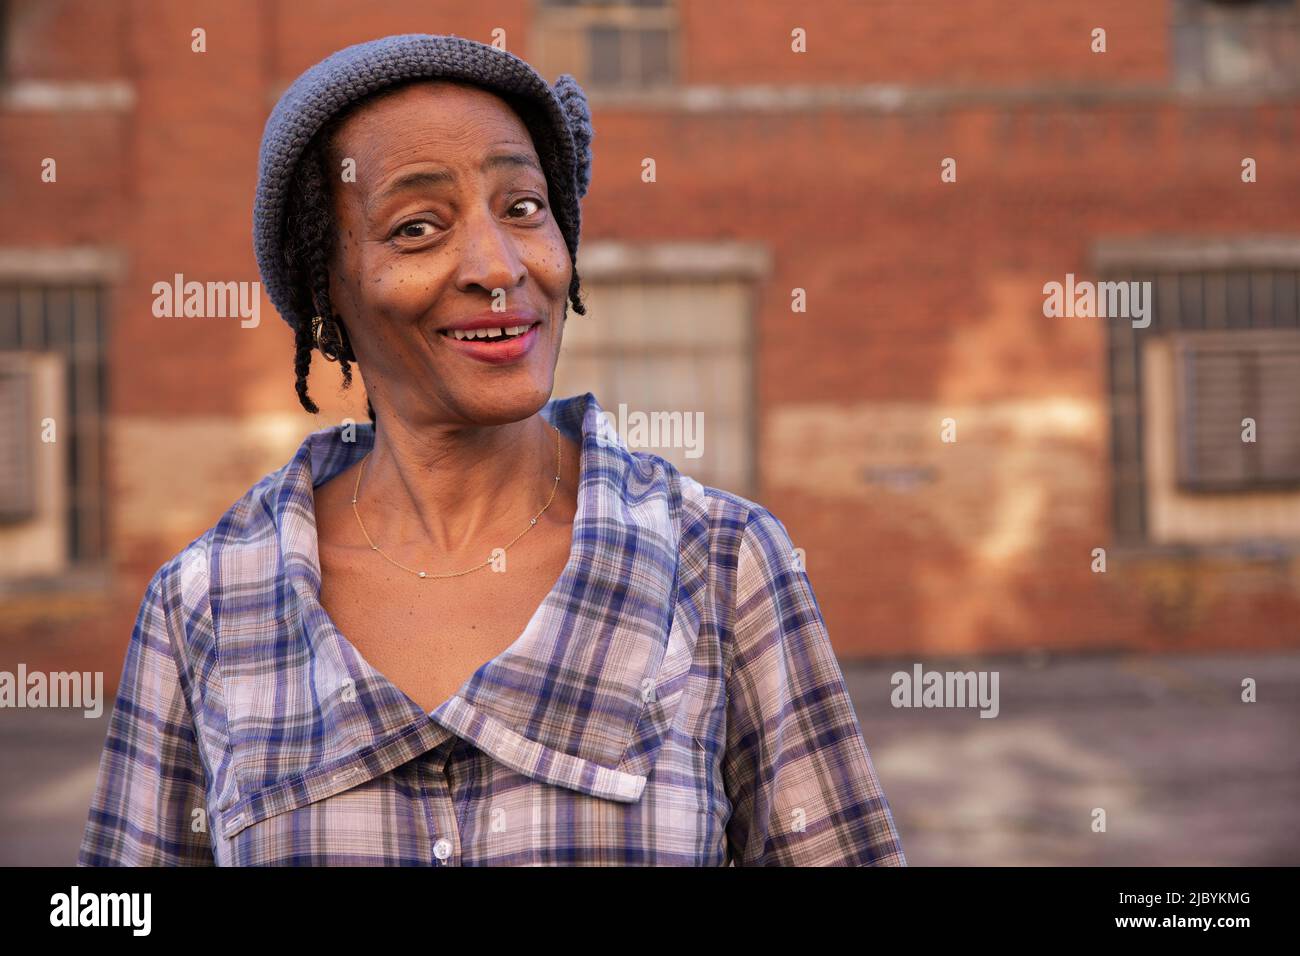 Portrait of older woman wearing knit hat standing in alley smiling looking at camera, brick wall in background Stock Photo